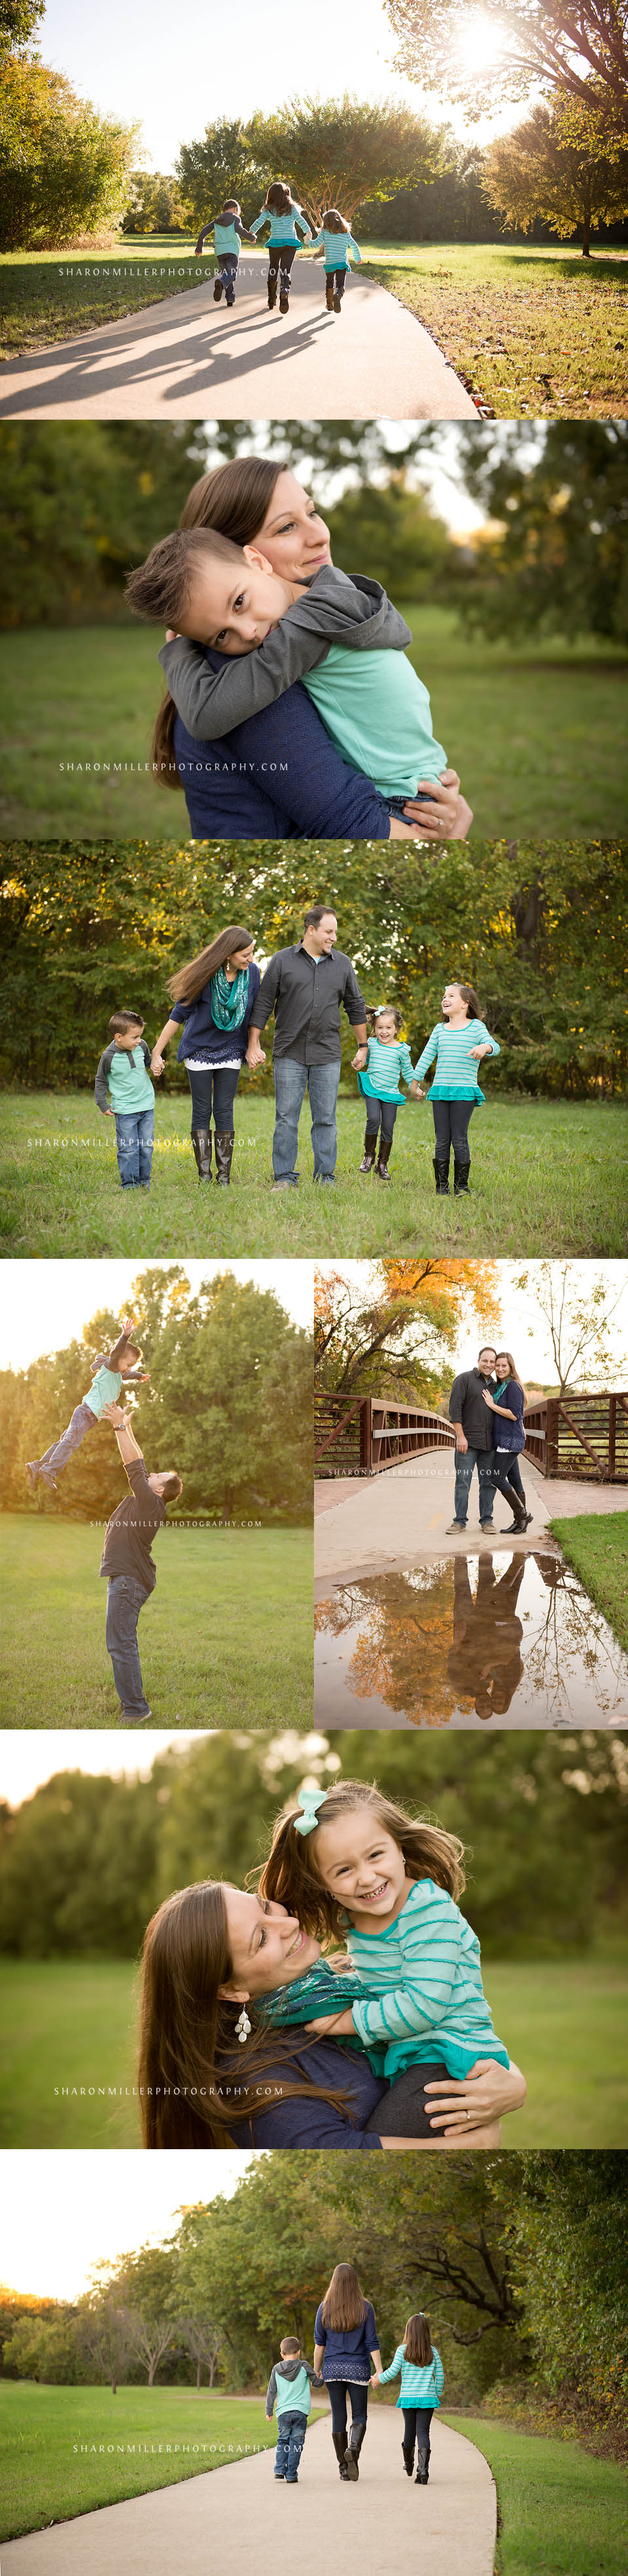 a lifestyle portrait session for a famlly of five at Parr Park in Grapevine, TX